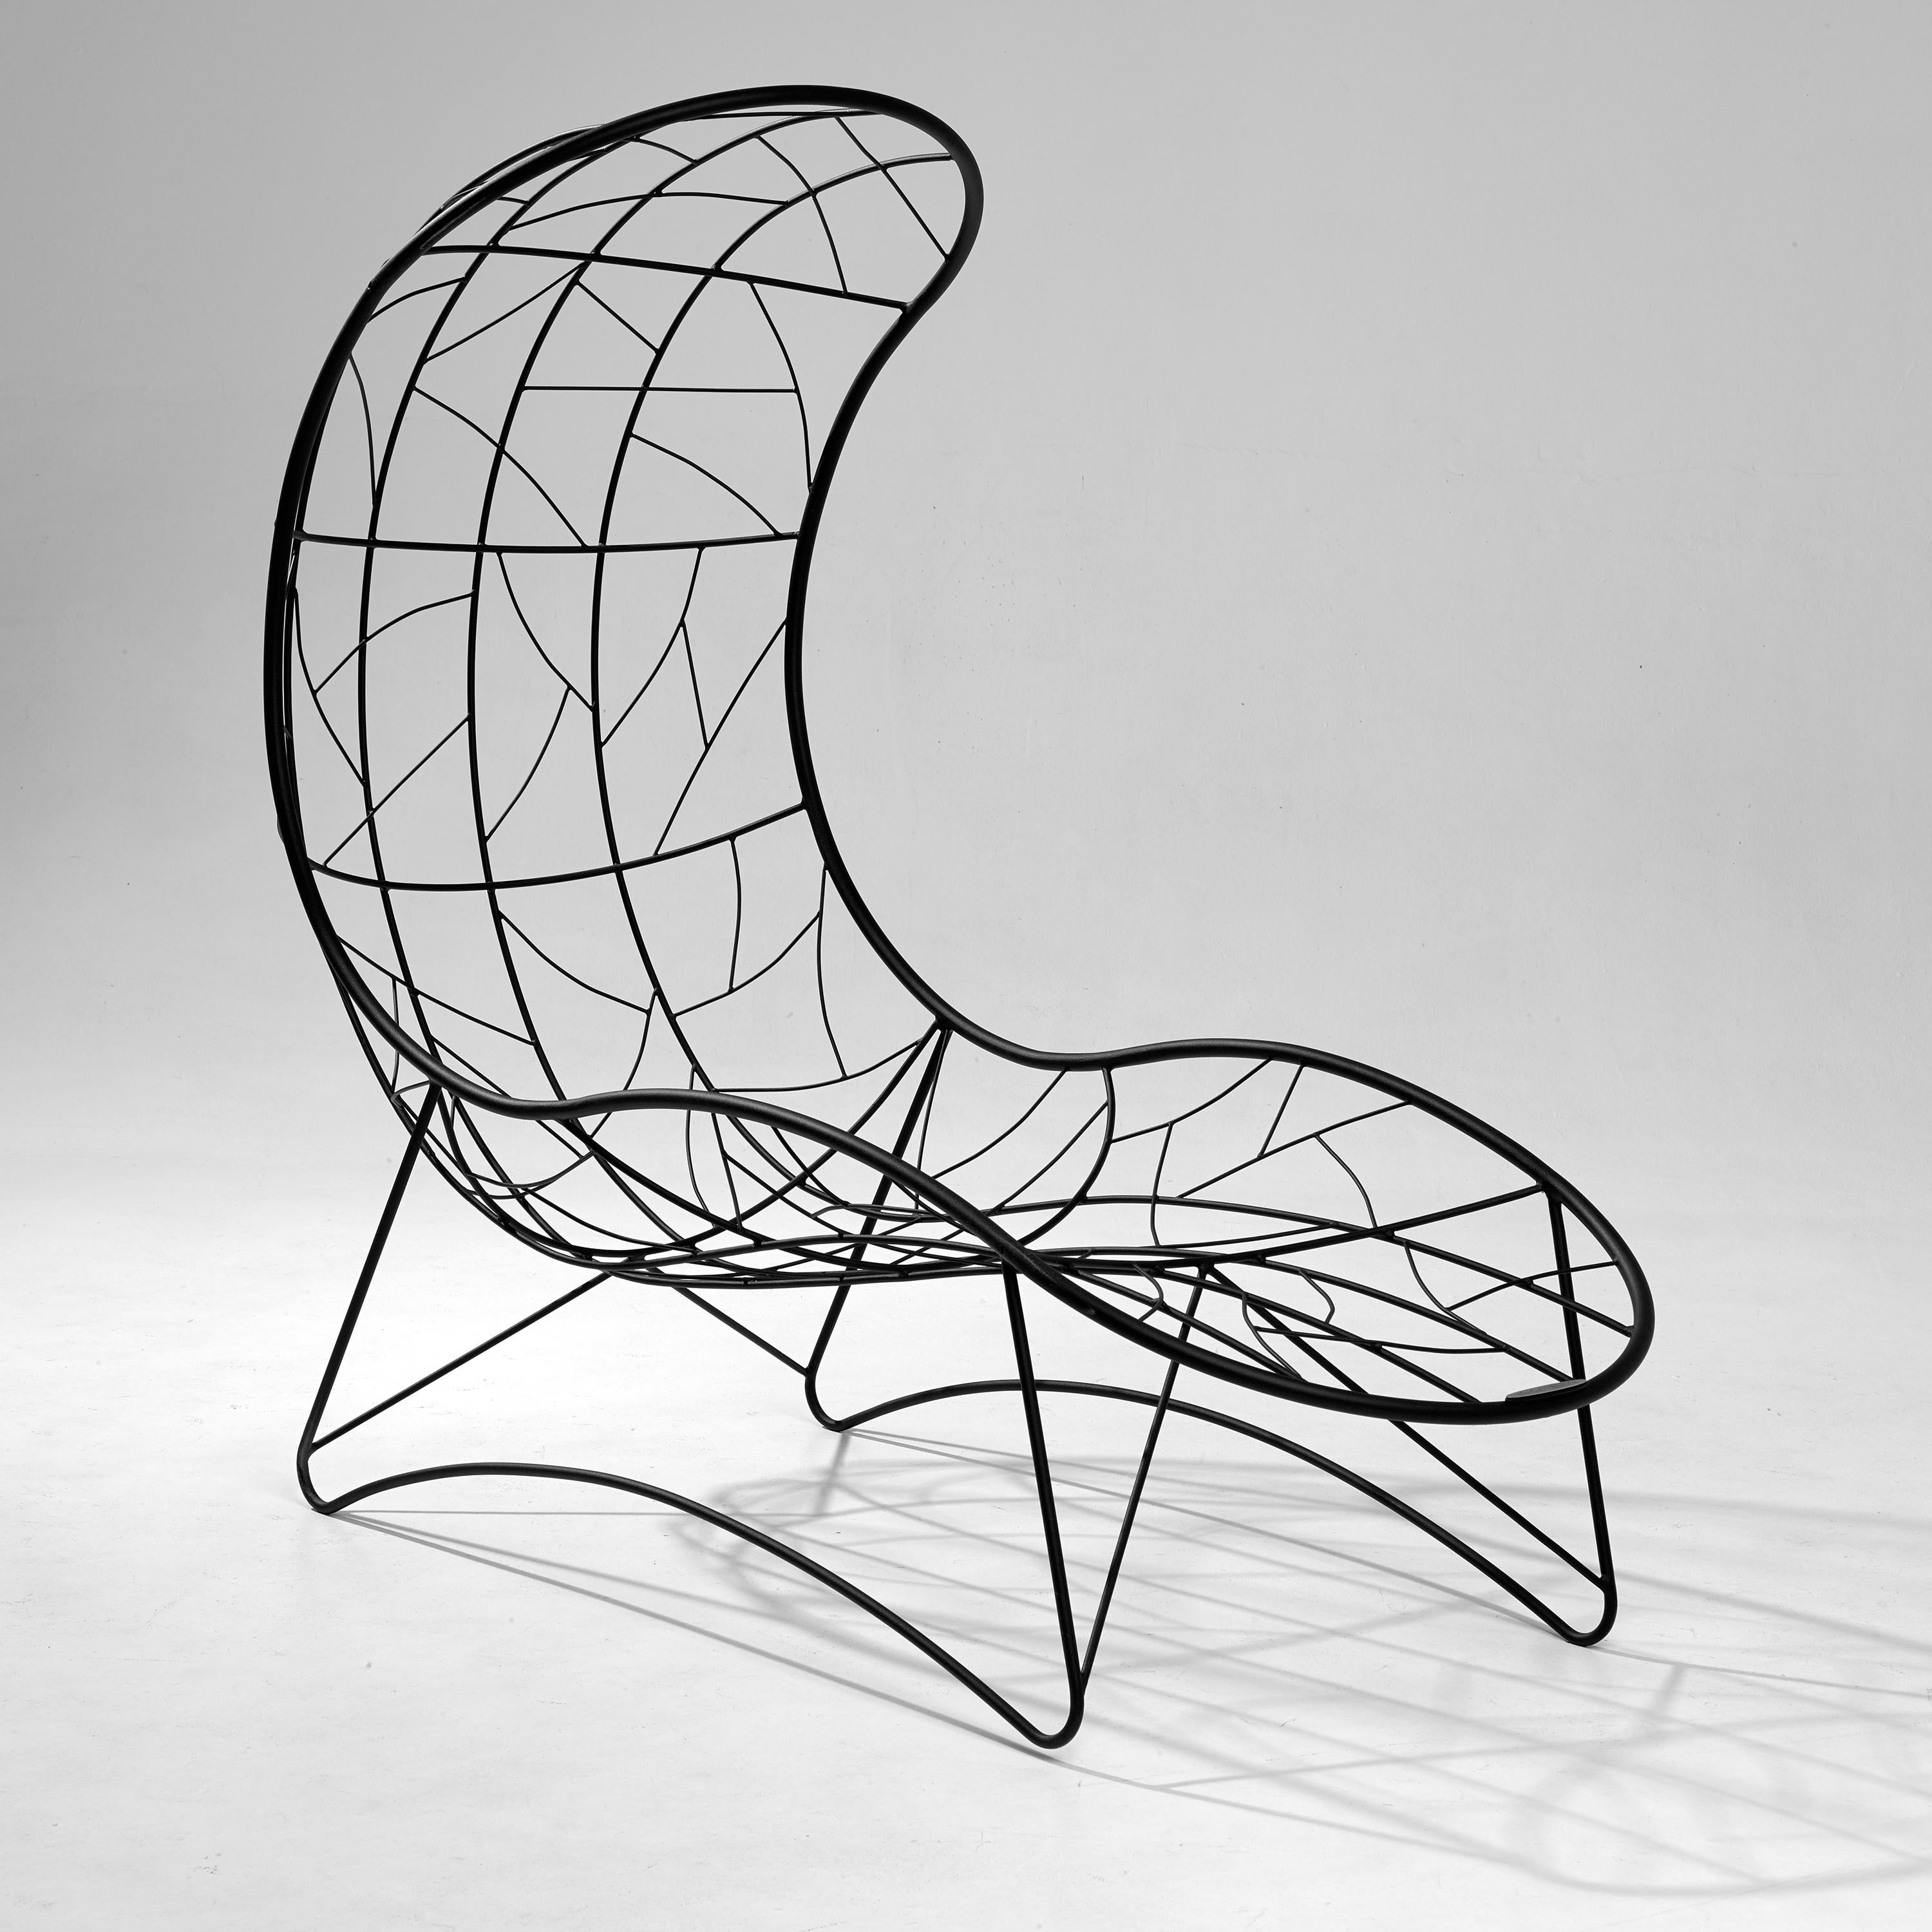 The recliner chair is sculptural and dynamic. Fluid and organic, they lend themselves for use as functional art pieces. The chair shape is inspired by the Cape Cobra and the pattern detail is reminiscent of the veins in leaves, tree branches